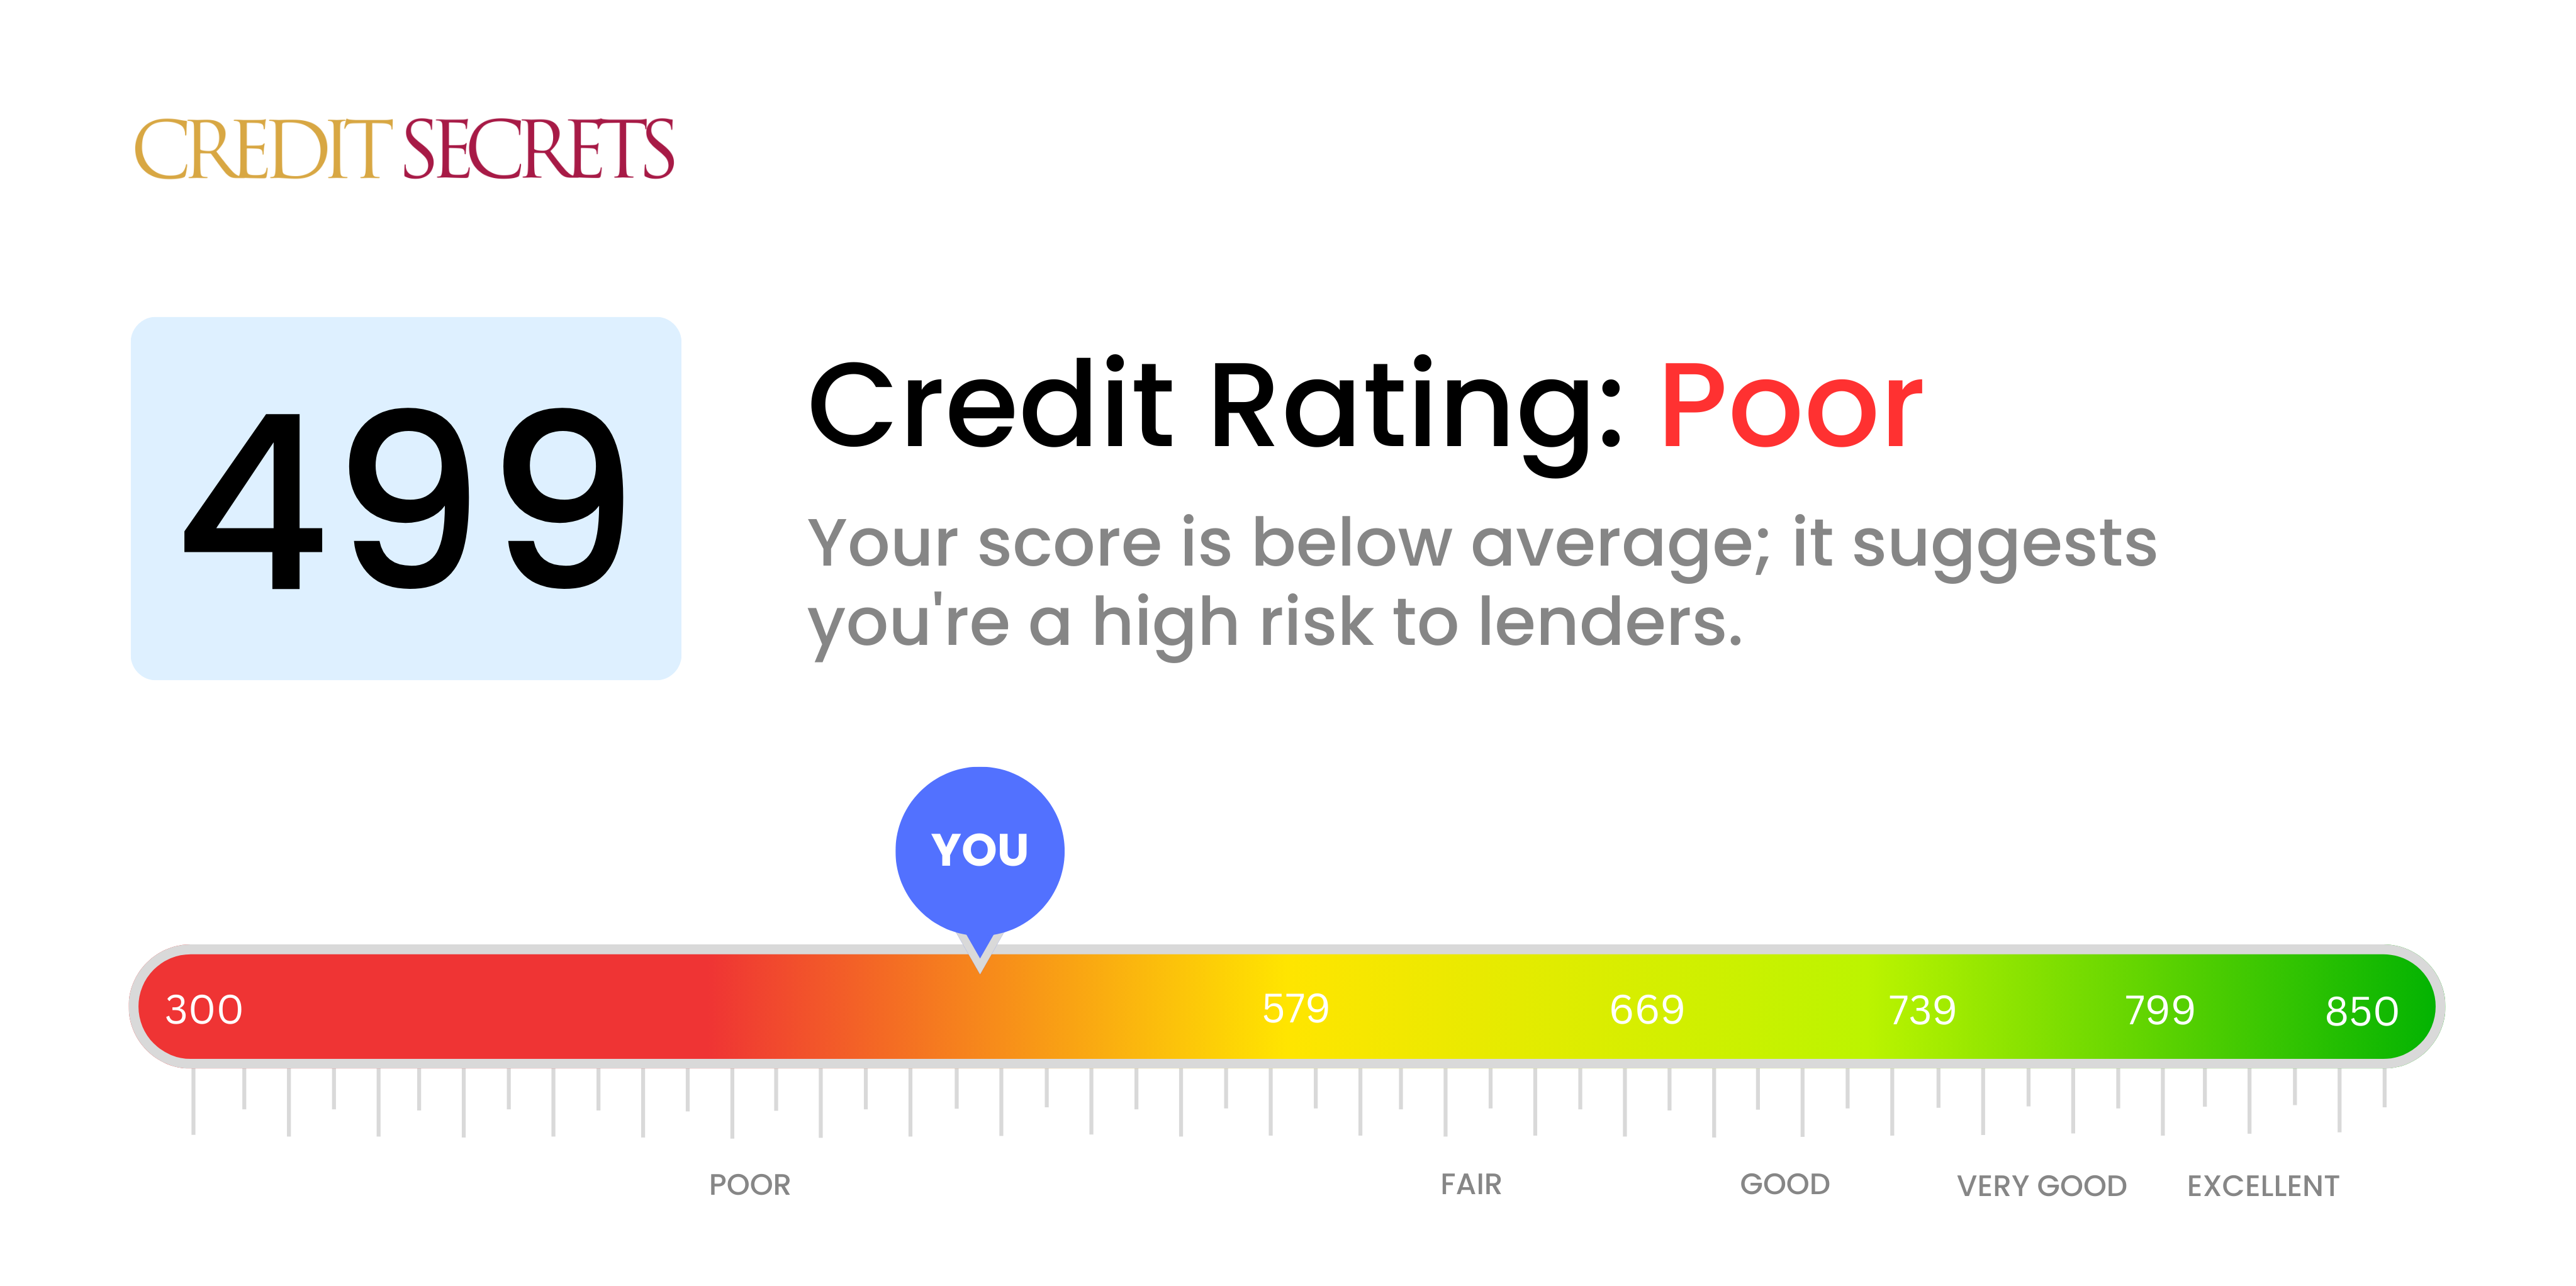 Is 499 a good credit score?